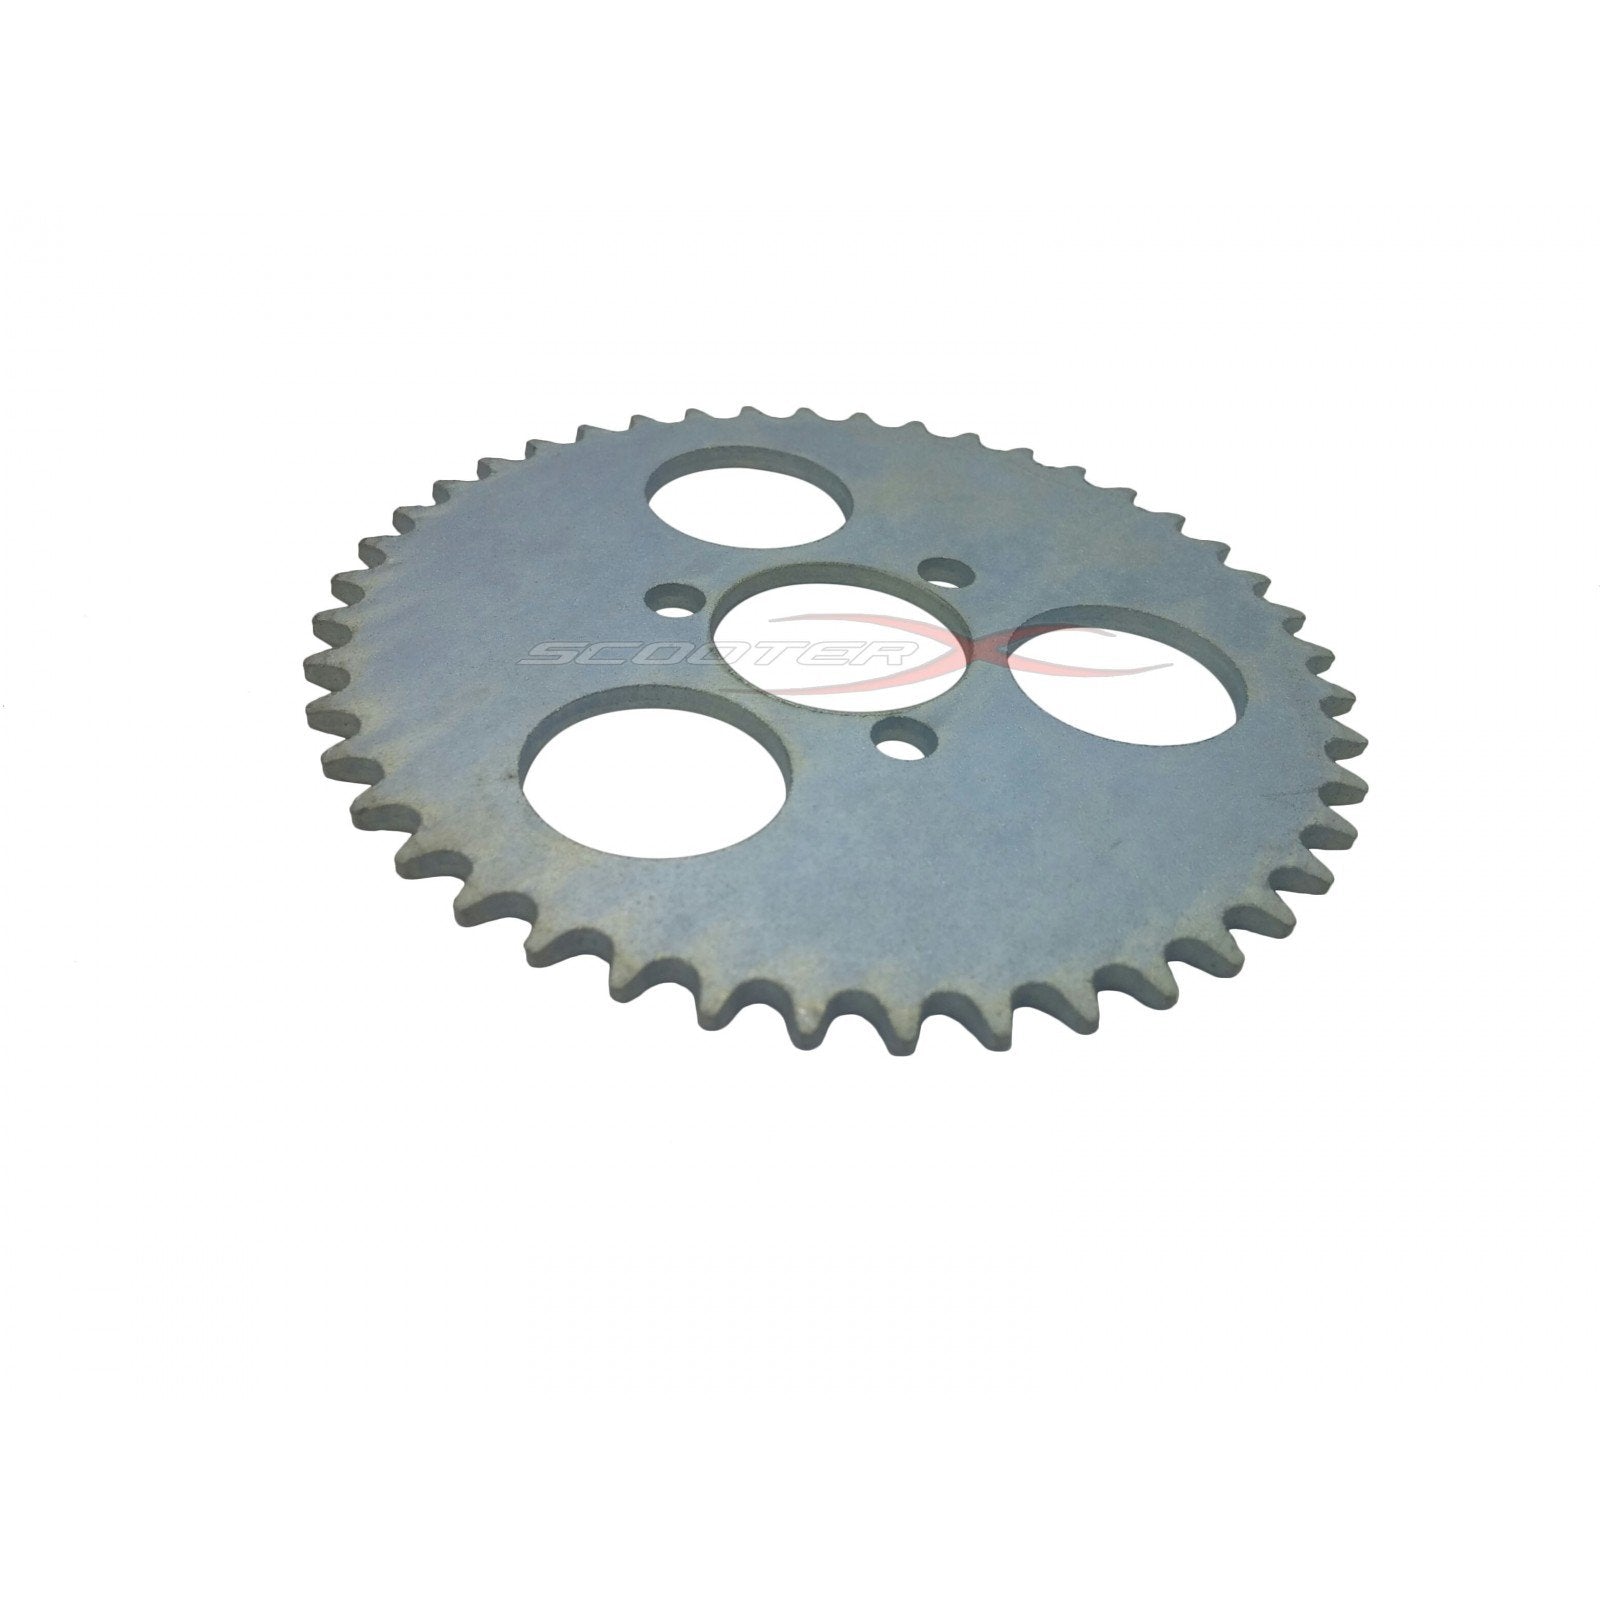 ScooterX SPROCKET 8mm 44 TOOTH For Gas Scooters